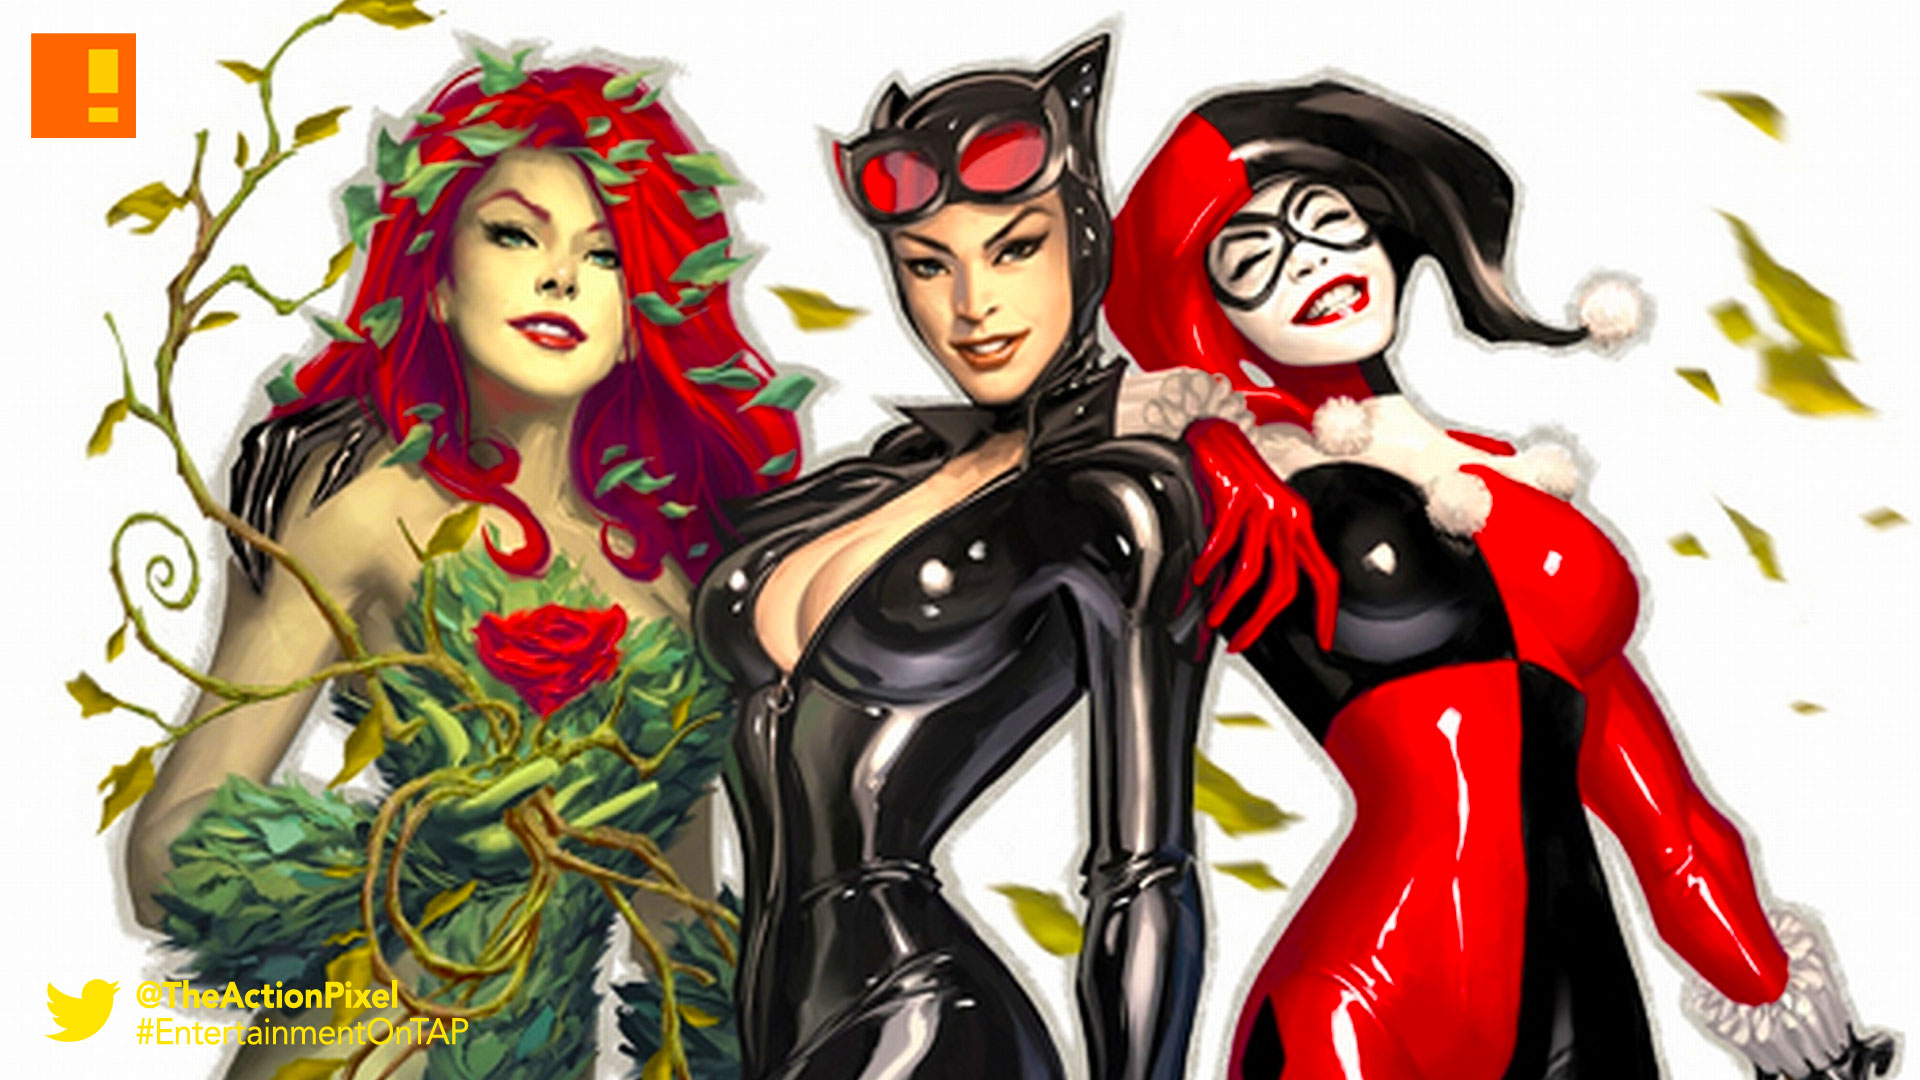 gotham city sirens,harley quinn,catwoman, poison Ivy,dc comics. the action pixel, @theactionpixel